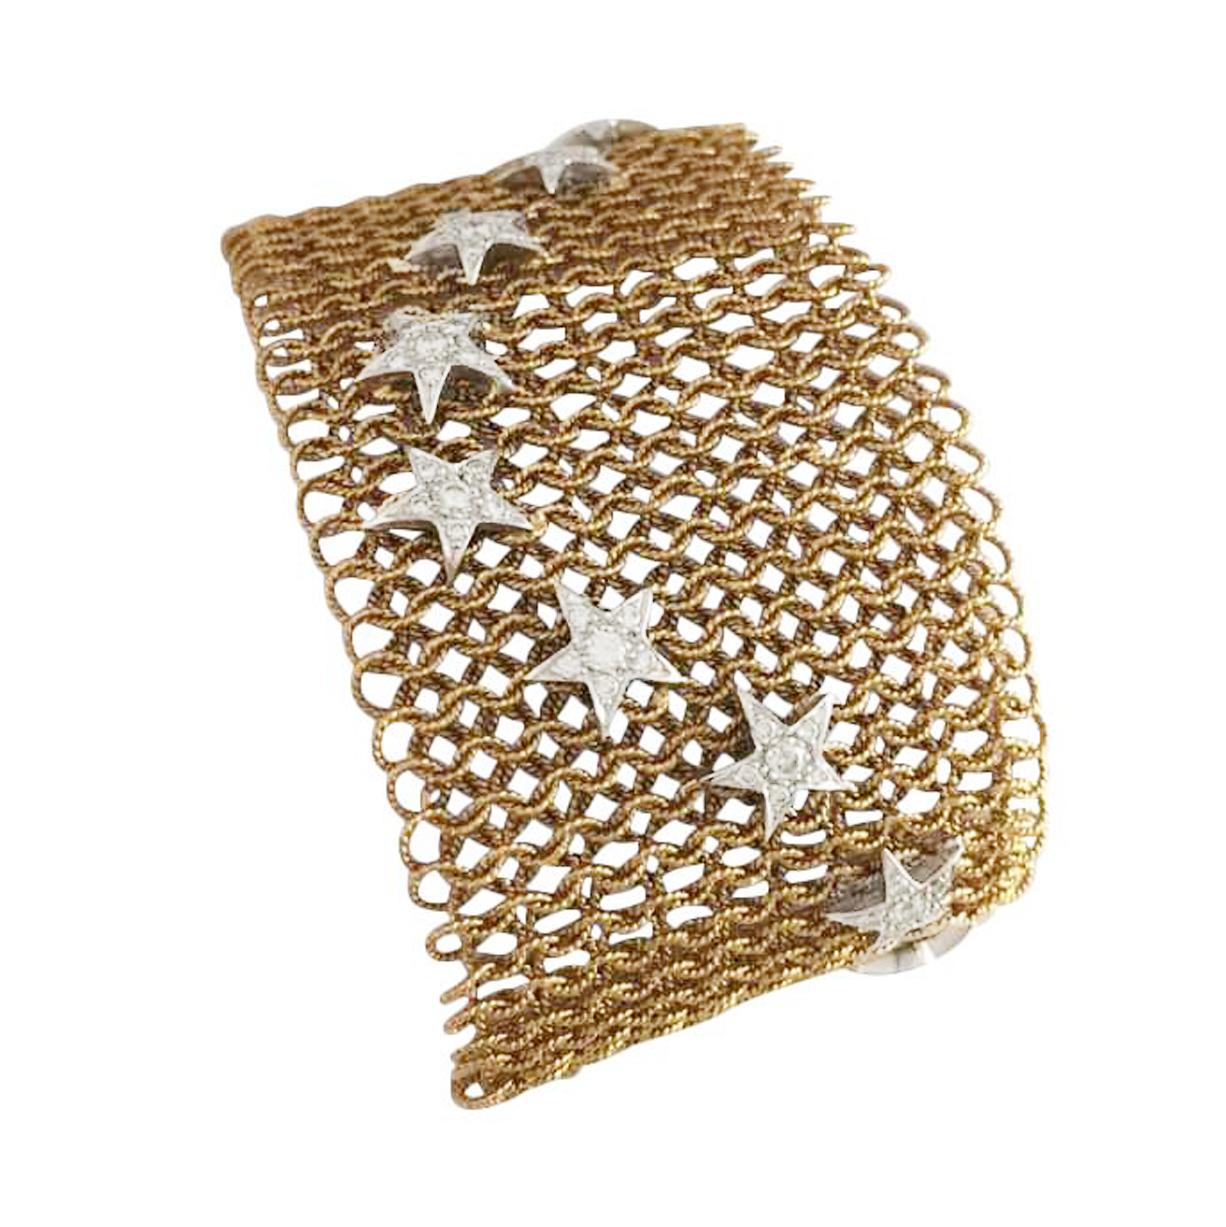 750/000 Pink gold Mesh coat bracelet, decorated with 16 stars set with brilliants.
Extremely confortable and soft to wear. End clasp with two push buttons.
Total weight of diamonds : about 1.60 carat
Weight : 59.3 grams
Length : 170 mm
Width : 40